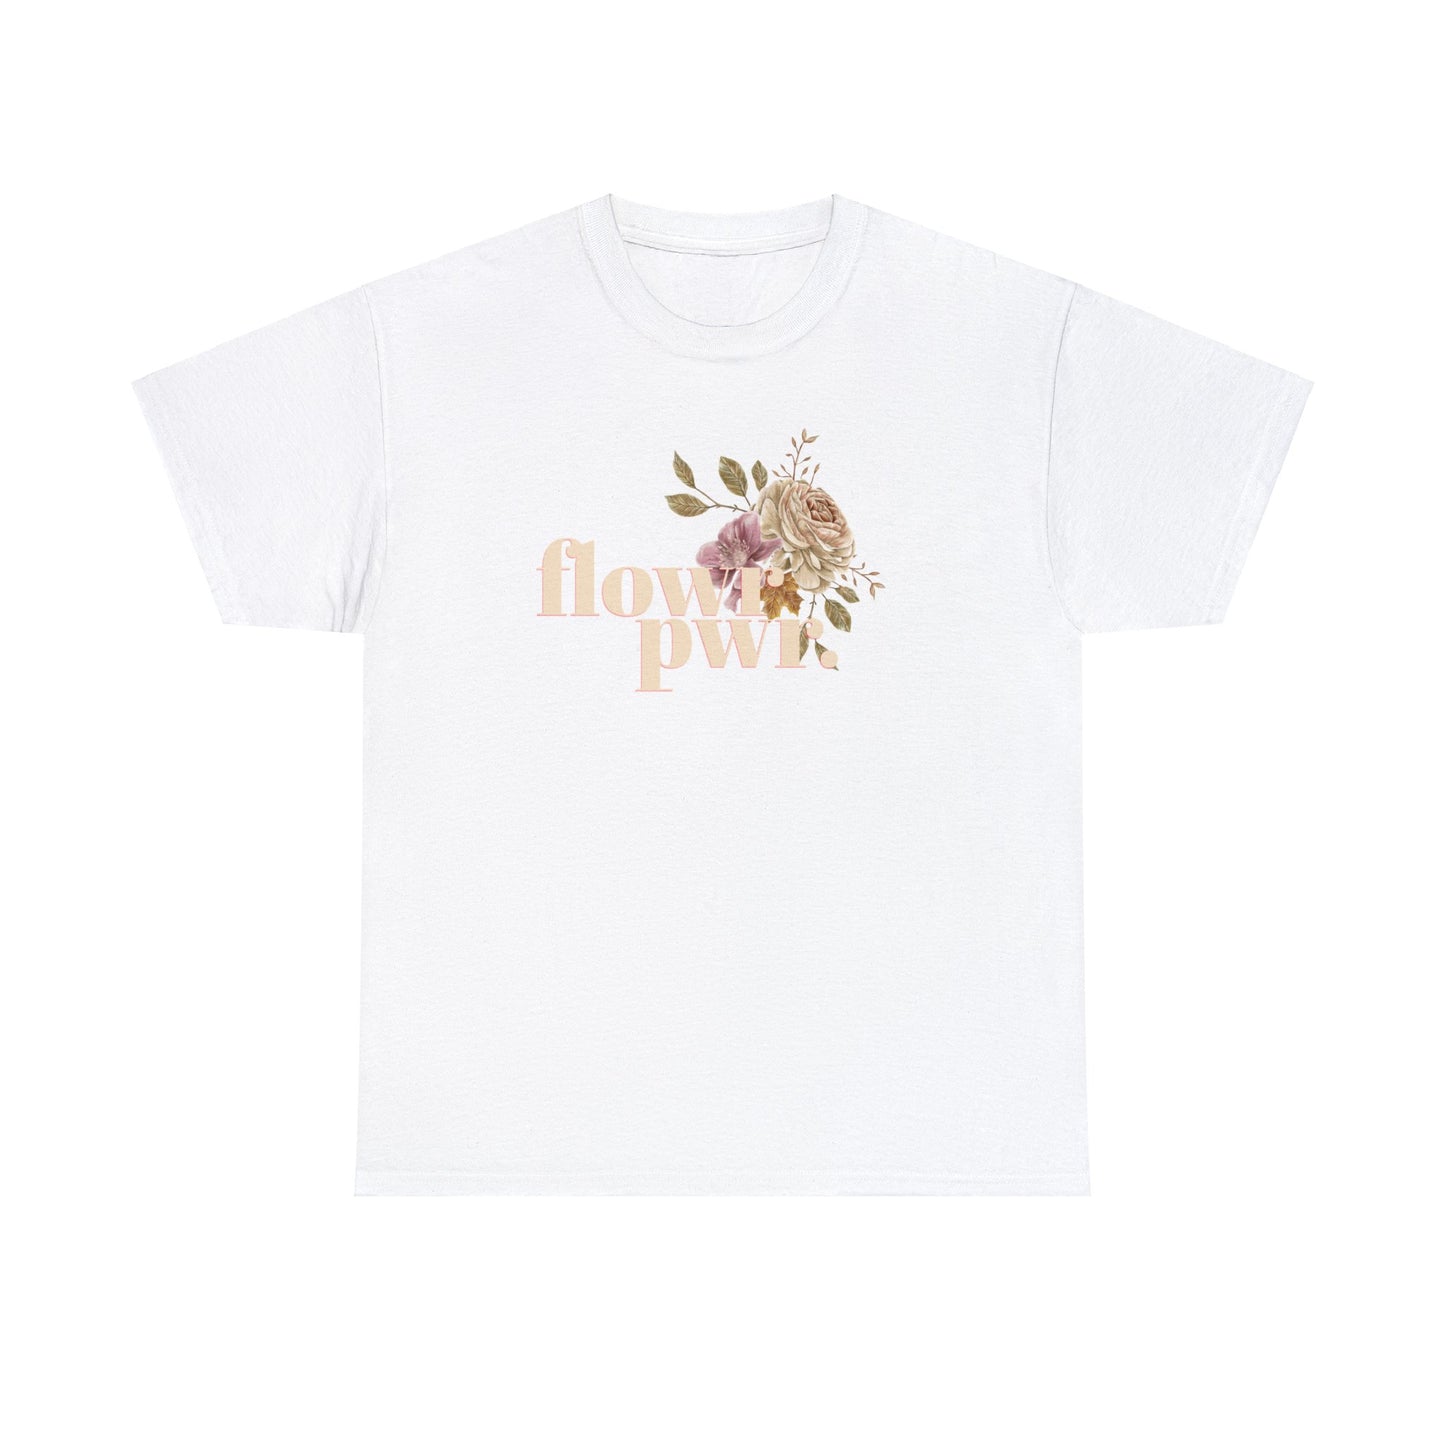 flowr powr.. florist graphic tee - EXPRESS DELIVERY